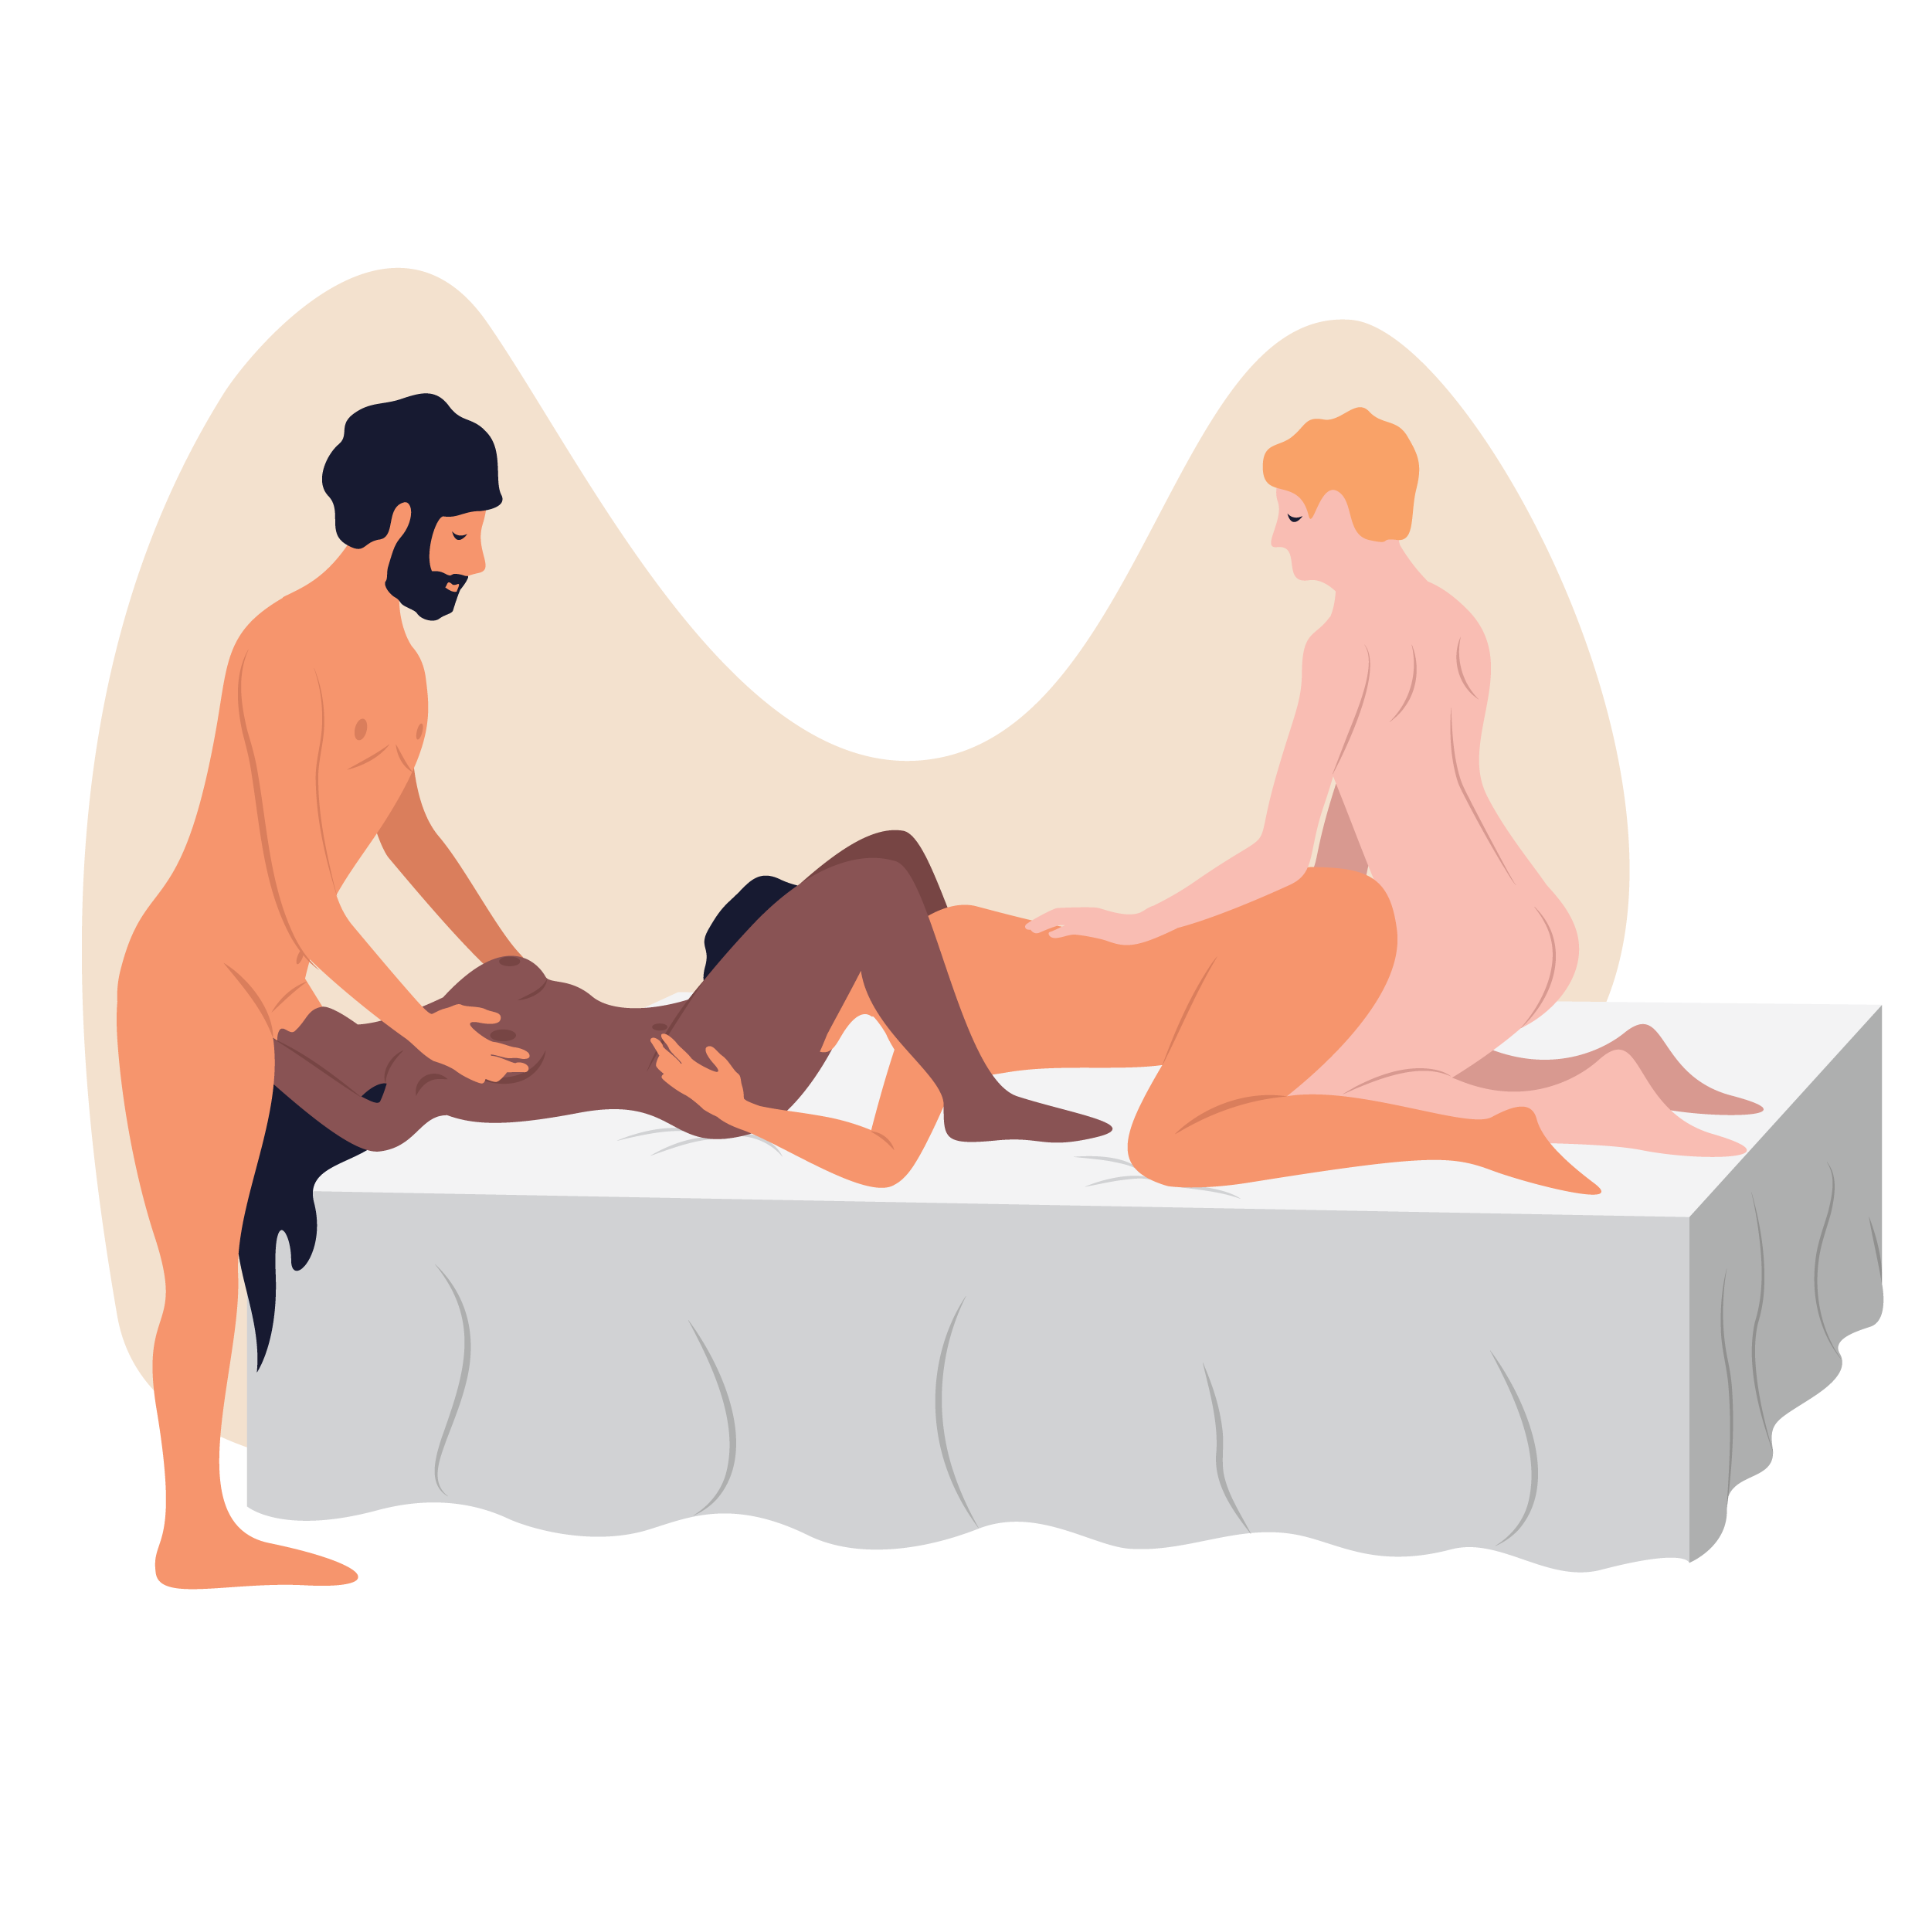 11 Foursome Sex Positions for Double the Pleasure and image image